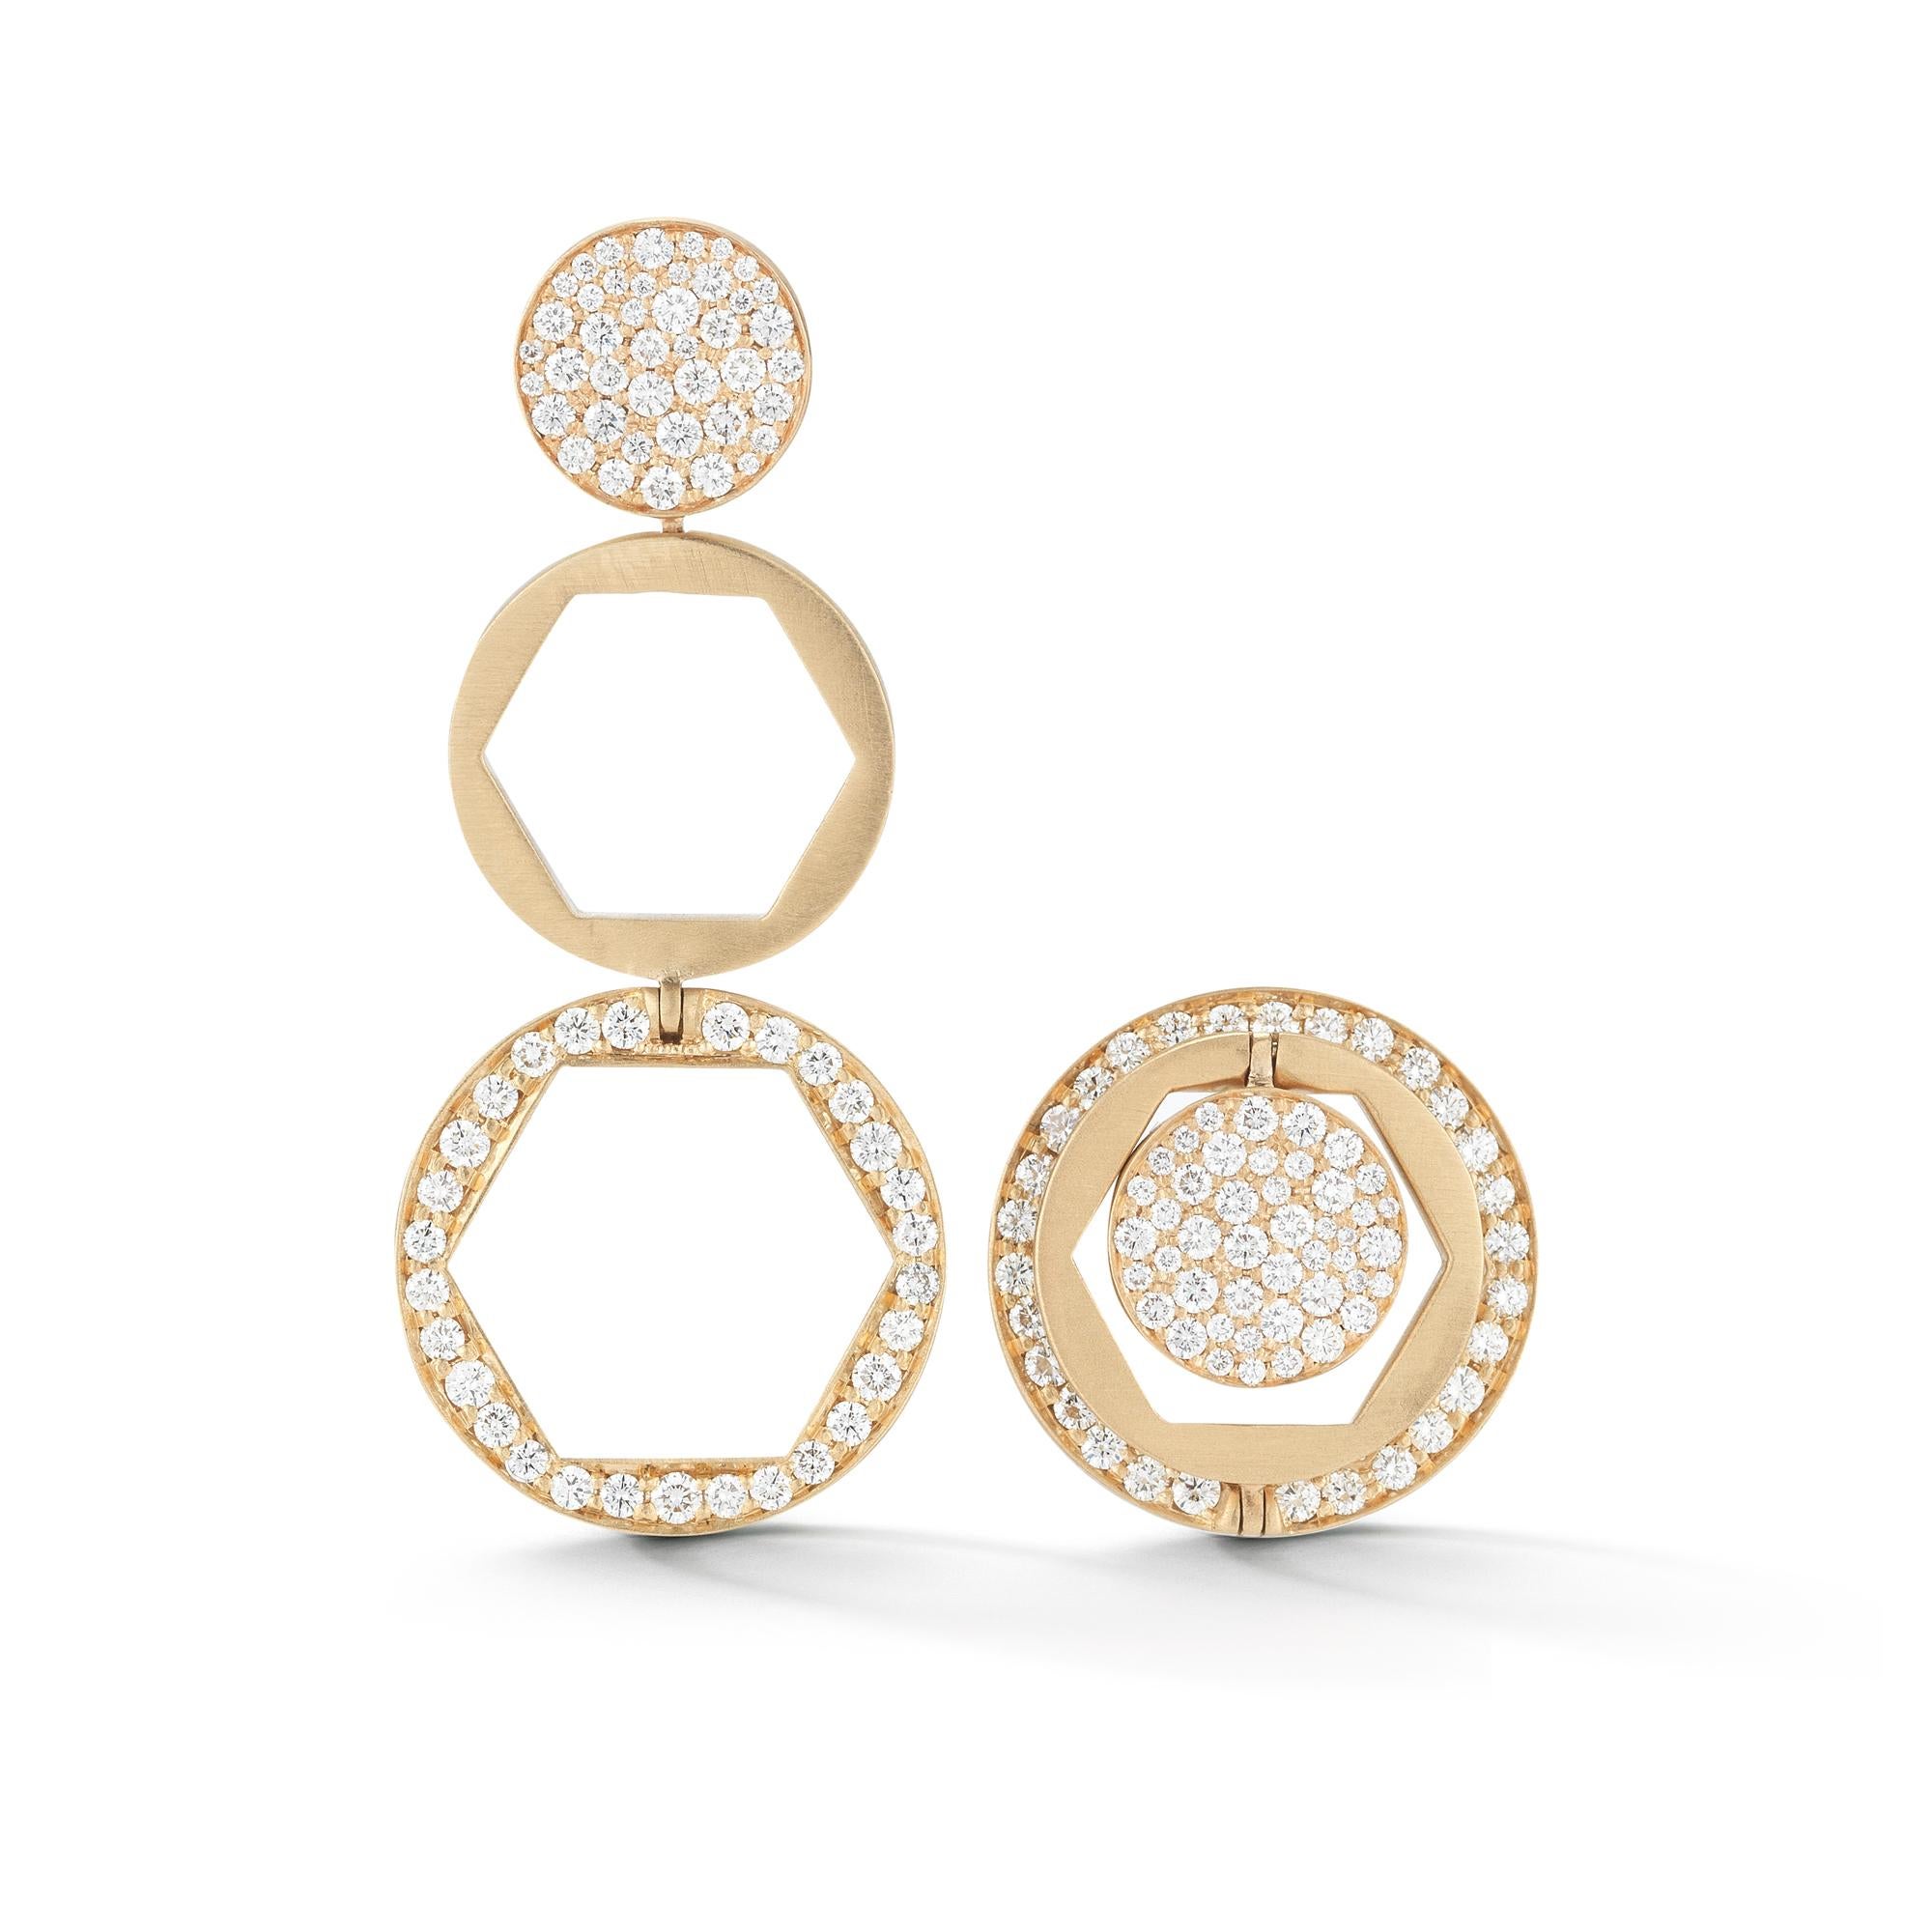 14k yellow gold Three Pence earrings with 1.12 of pave set round white diamonds.
